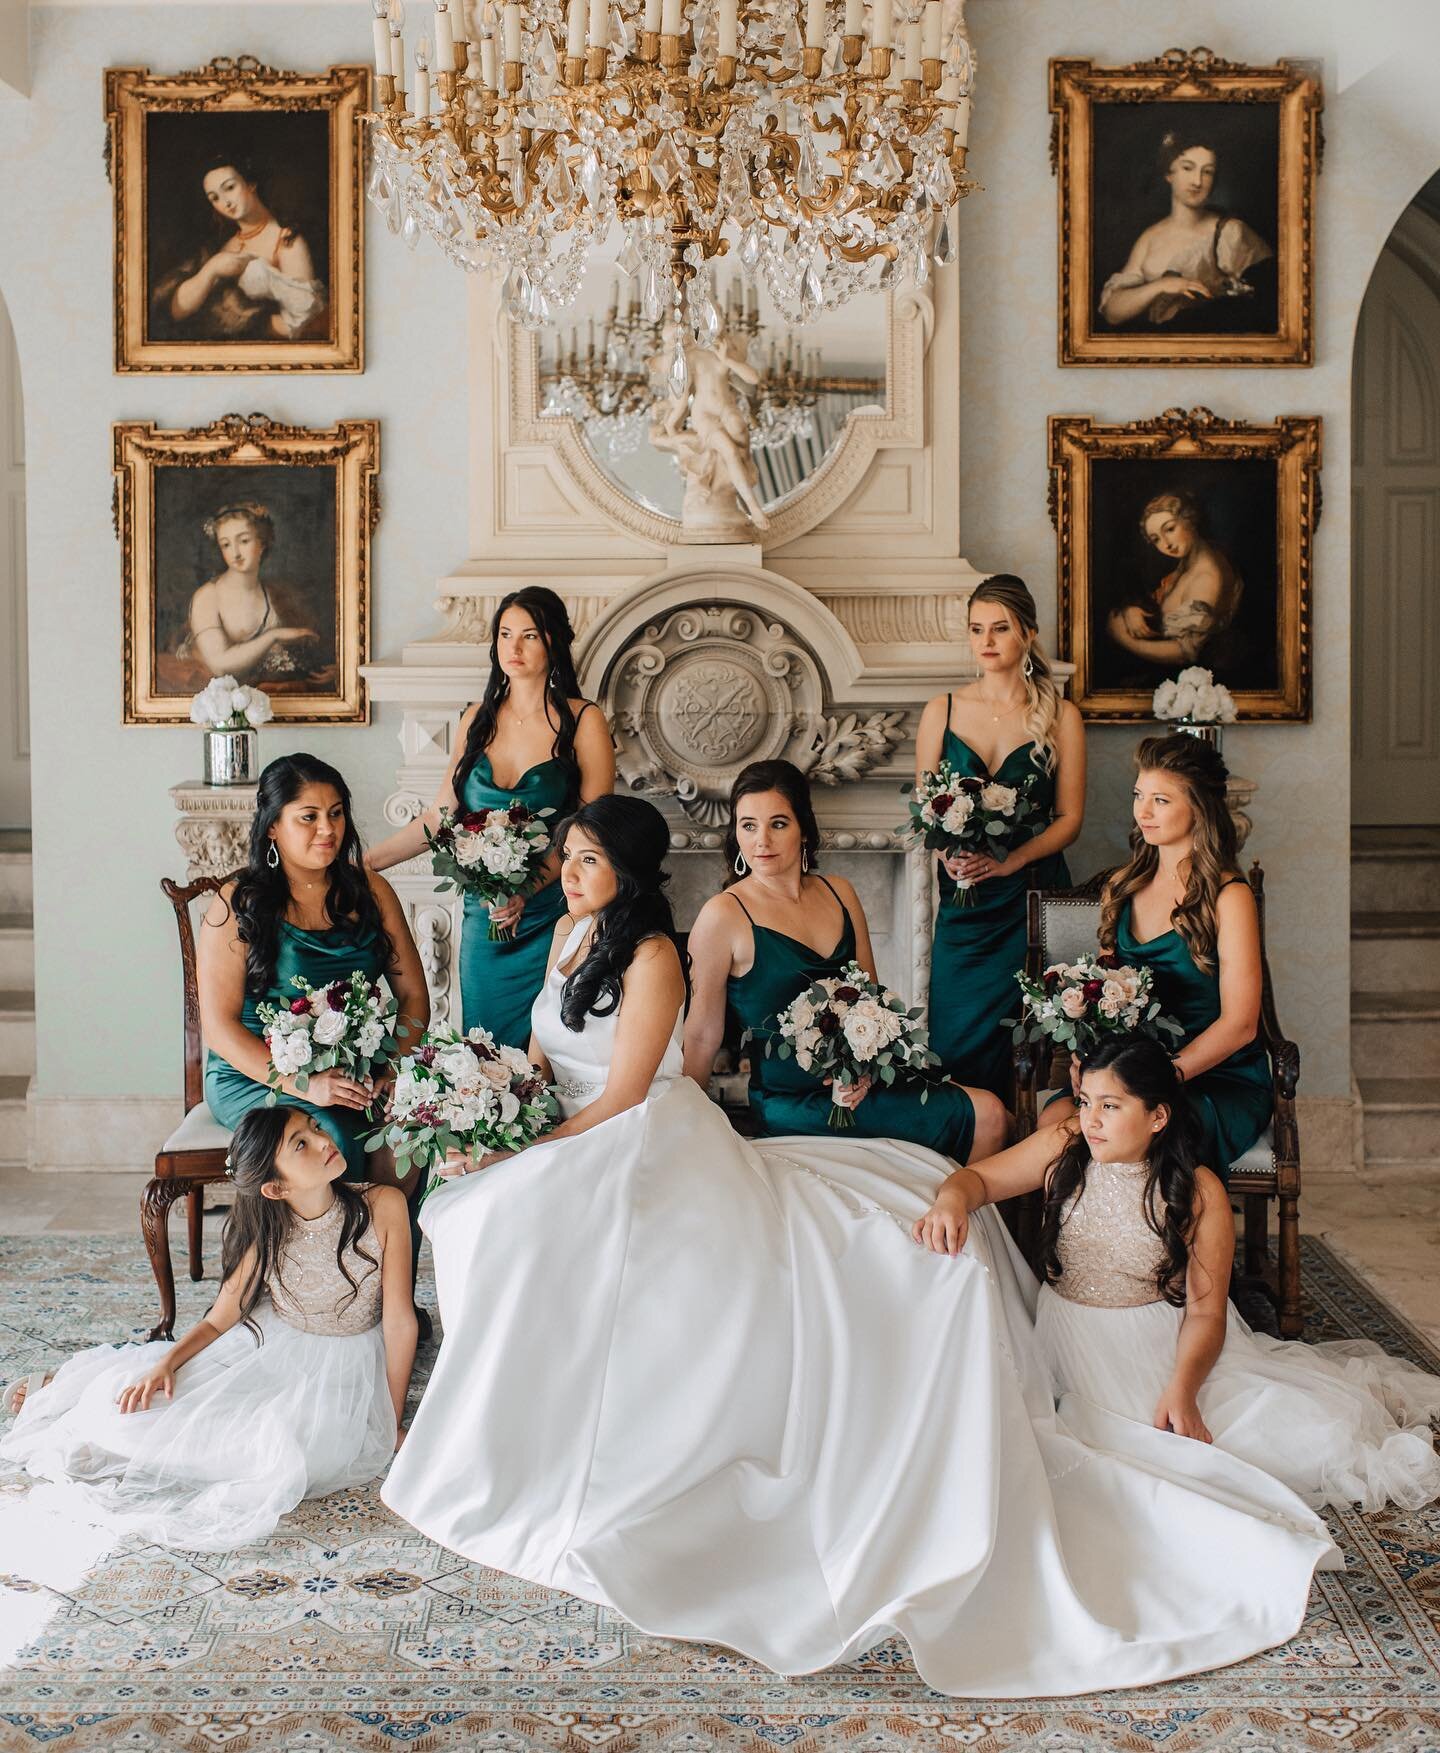 Nadia&rsquo;s girls rich jewel tone dresses are a trend we can get behind! We went with eggplant and burgundy florals for the bouquets to pop against their gorgeous emerald satin dresses!
.
.⁠
.⁠⠀⁠⠀
🌸: @weddingsbyvogue 
📸: @act_photo 
📍: @doverhal